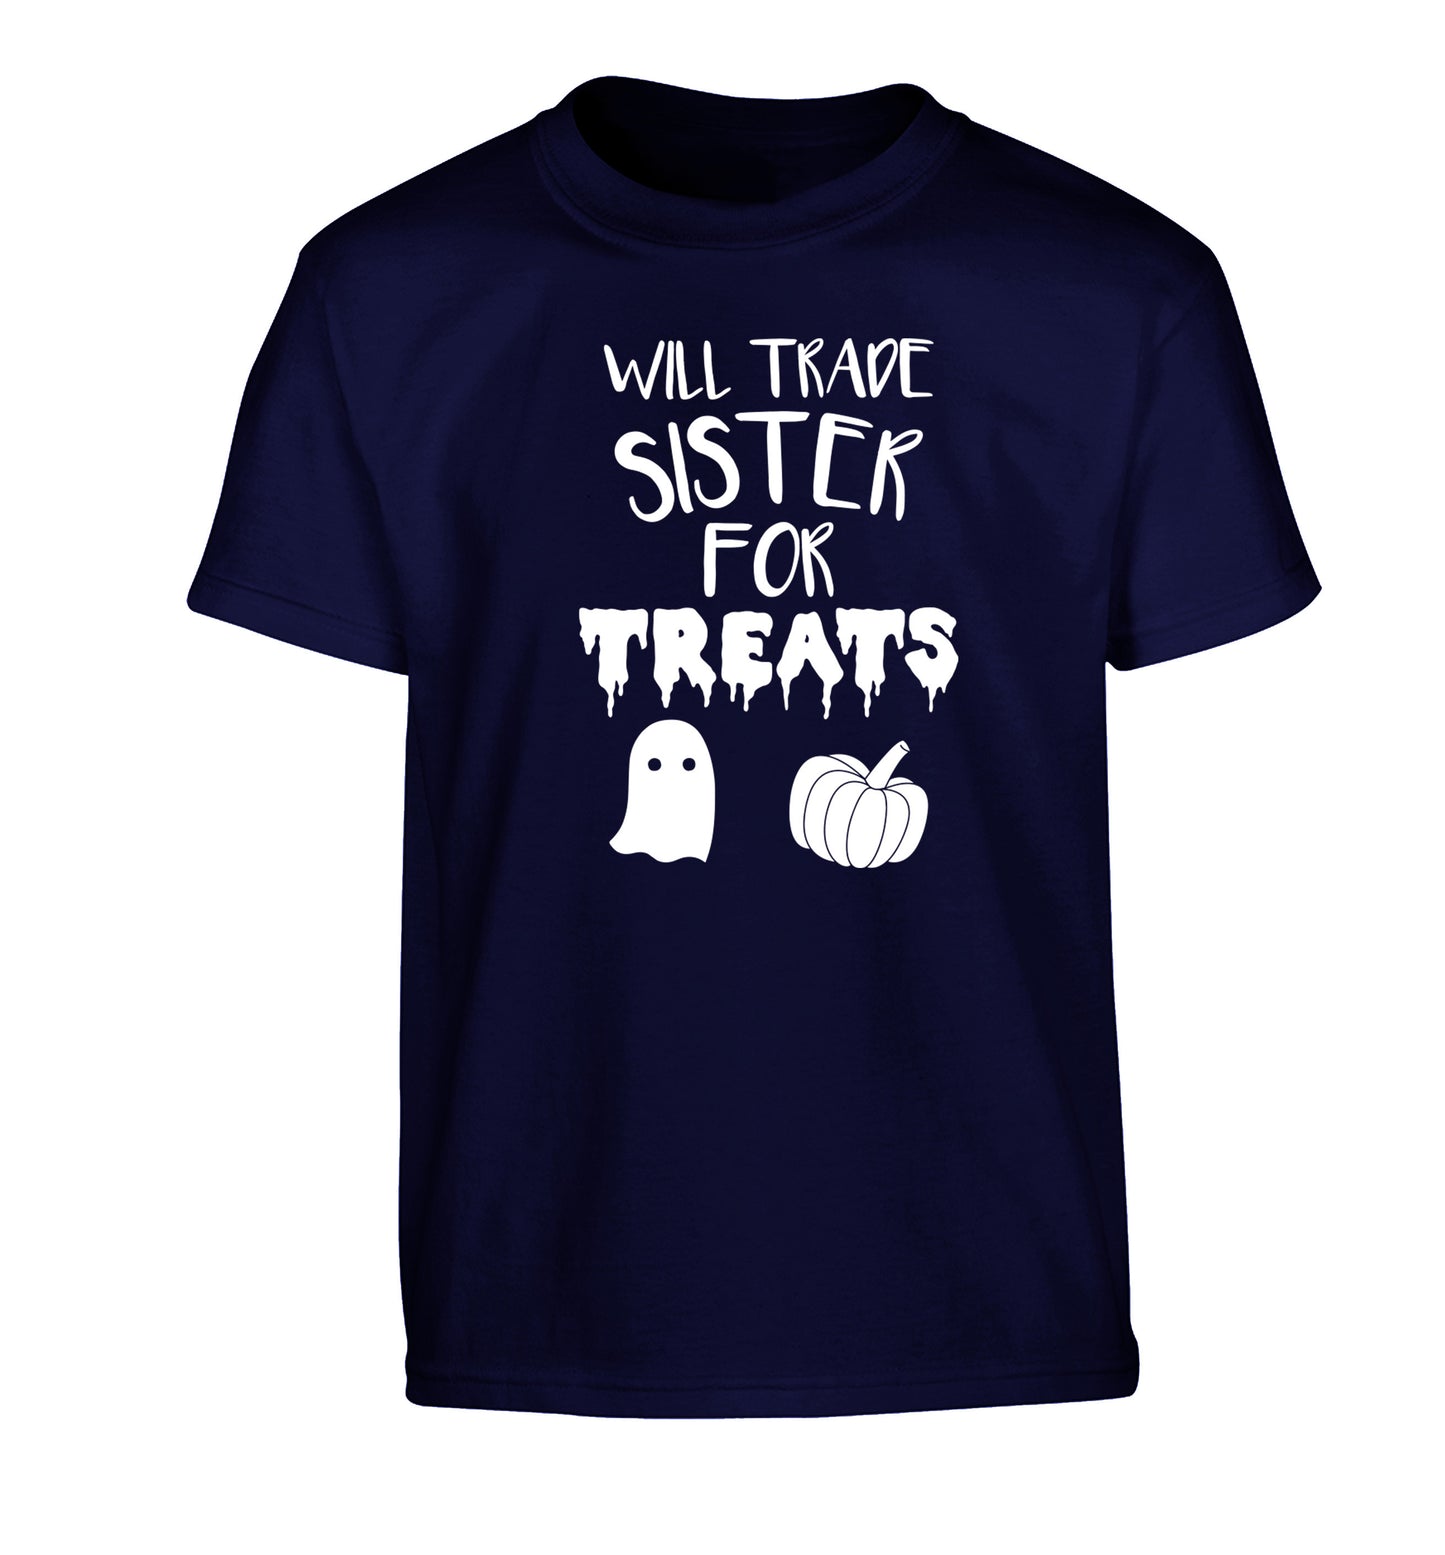 Will trade sister for treats Children's navy Tshirt 12-14 Years